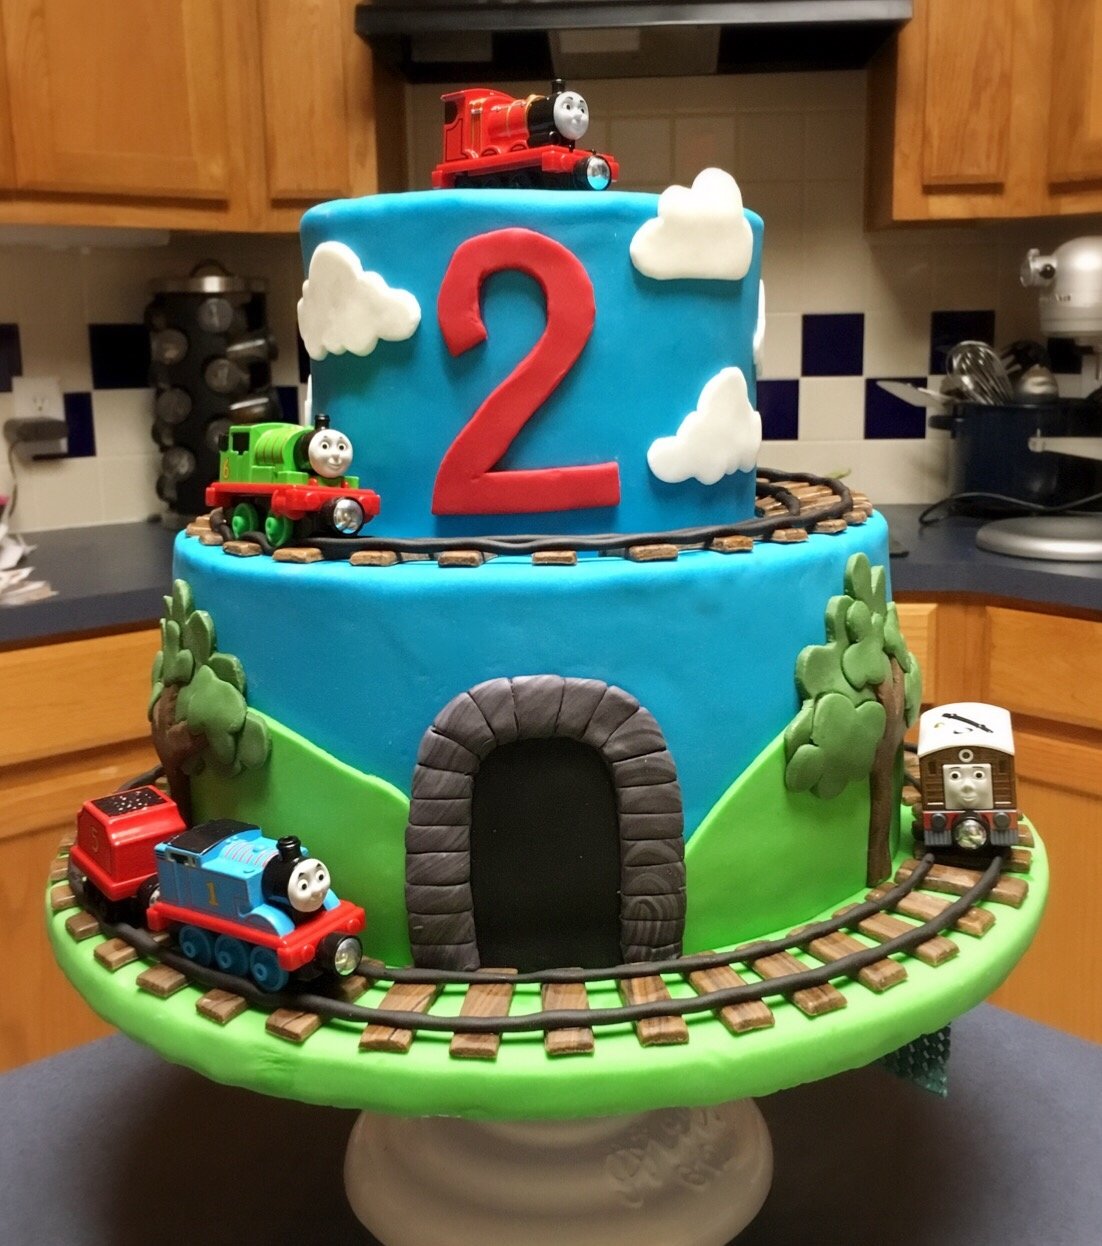 10 Attractive Thomas The Train Birthday Cake Ideas thomas the train cake noah pinterest cake birthdays and 2022